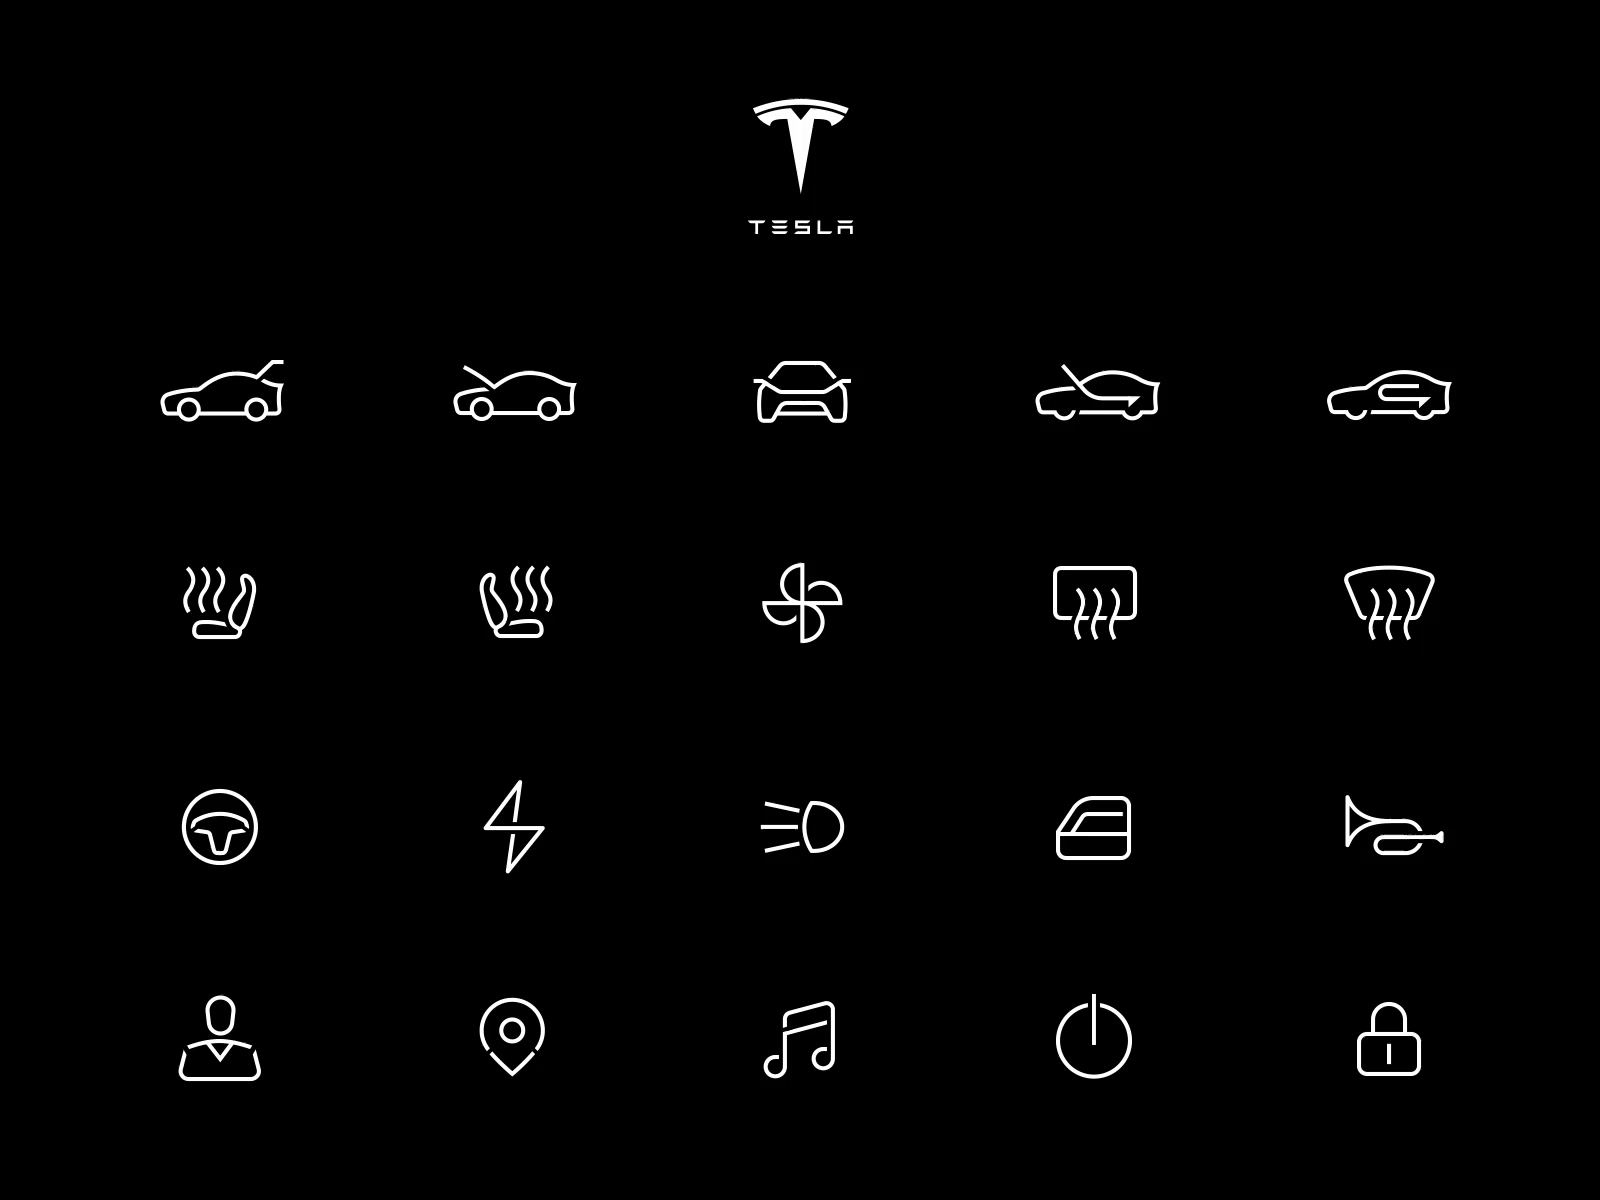 tesla model 3 app icon by afroman for radesign on dribbble tesla model 3 app icon by afroman for